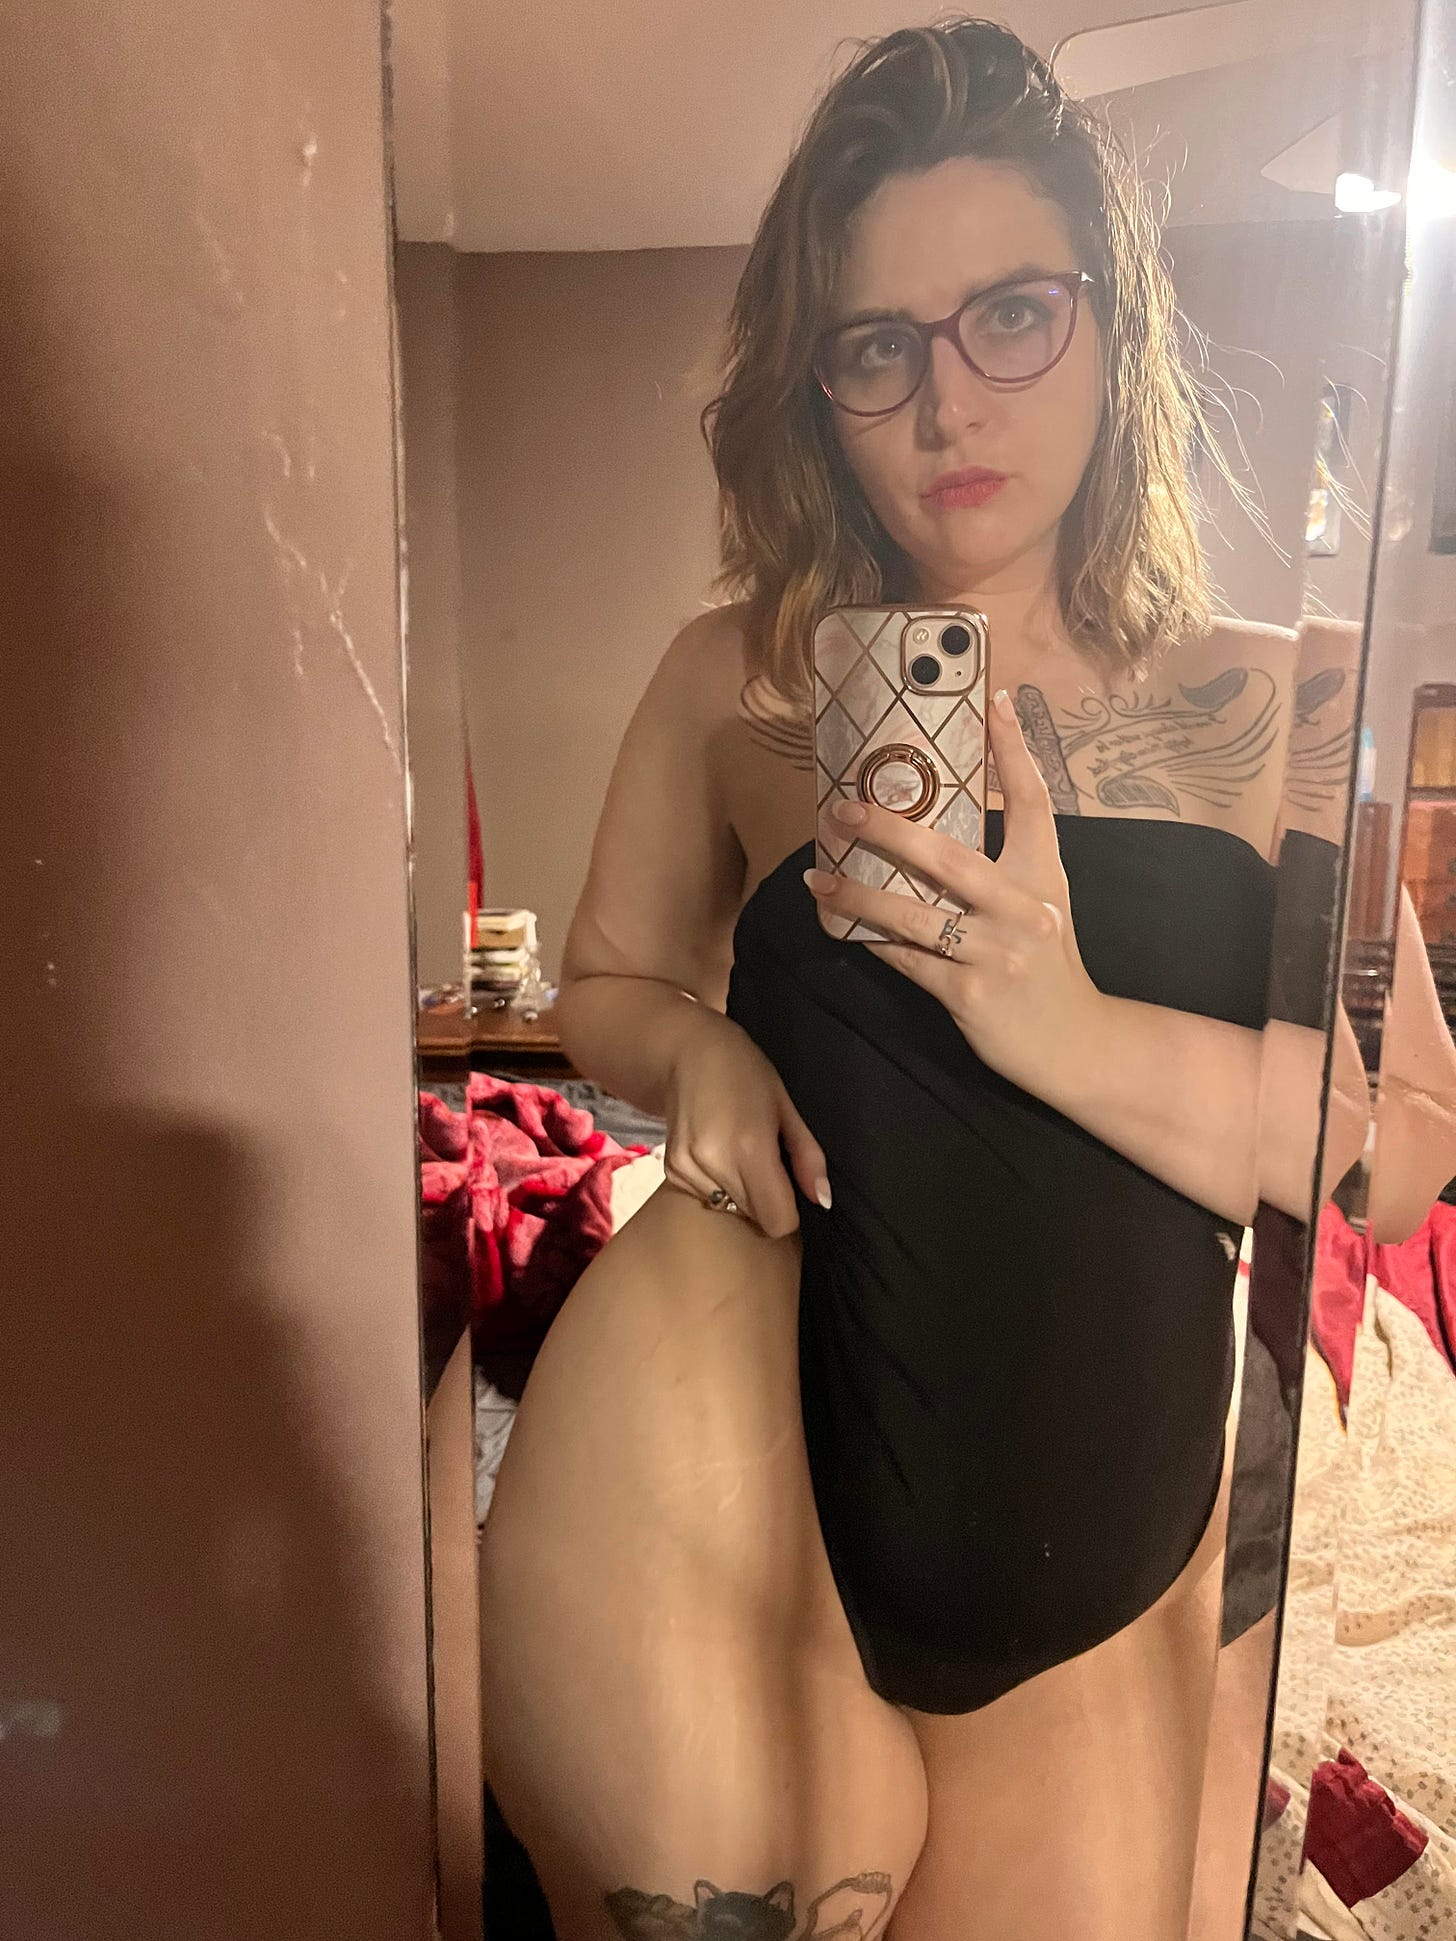 author being an unabashed thirst trapping whore with a clearly dirty room, wearing one-piece black suit with phone and glasses and showing off thicc thighs